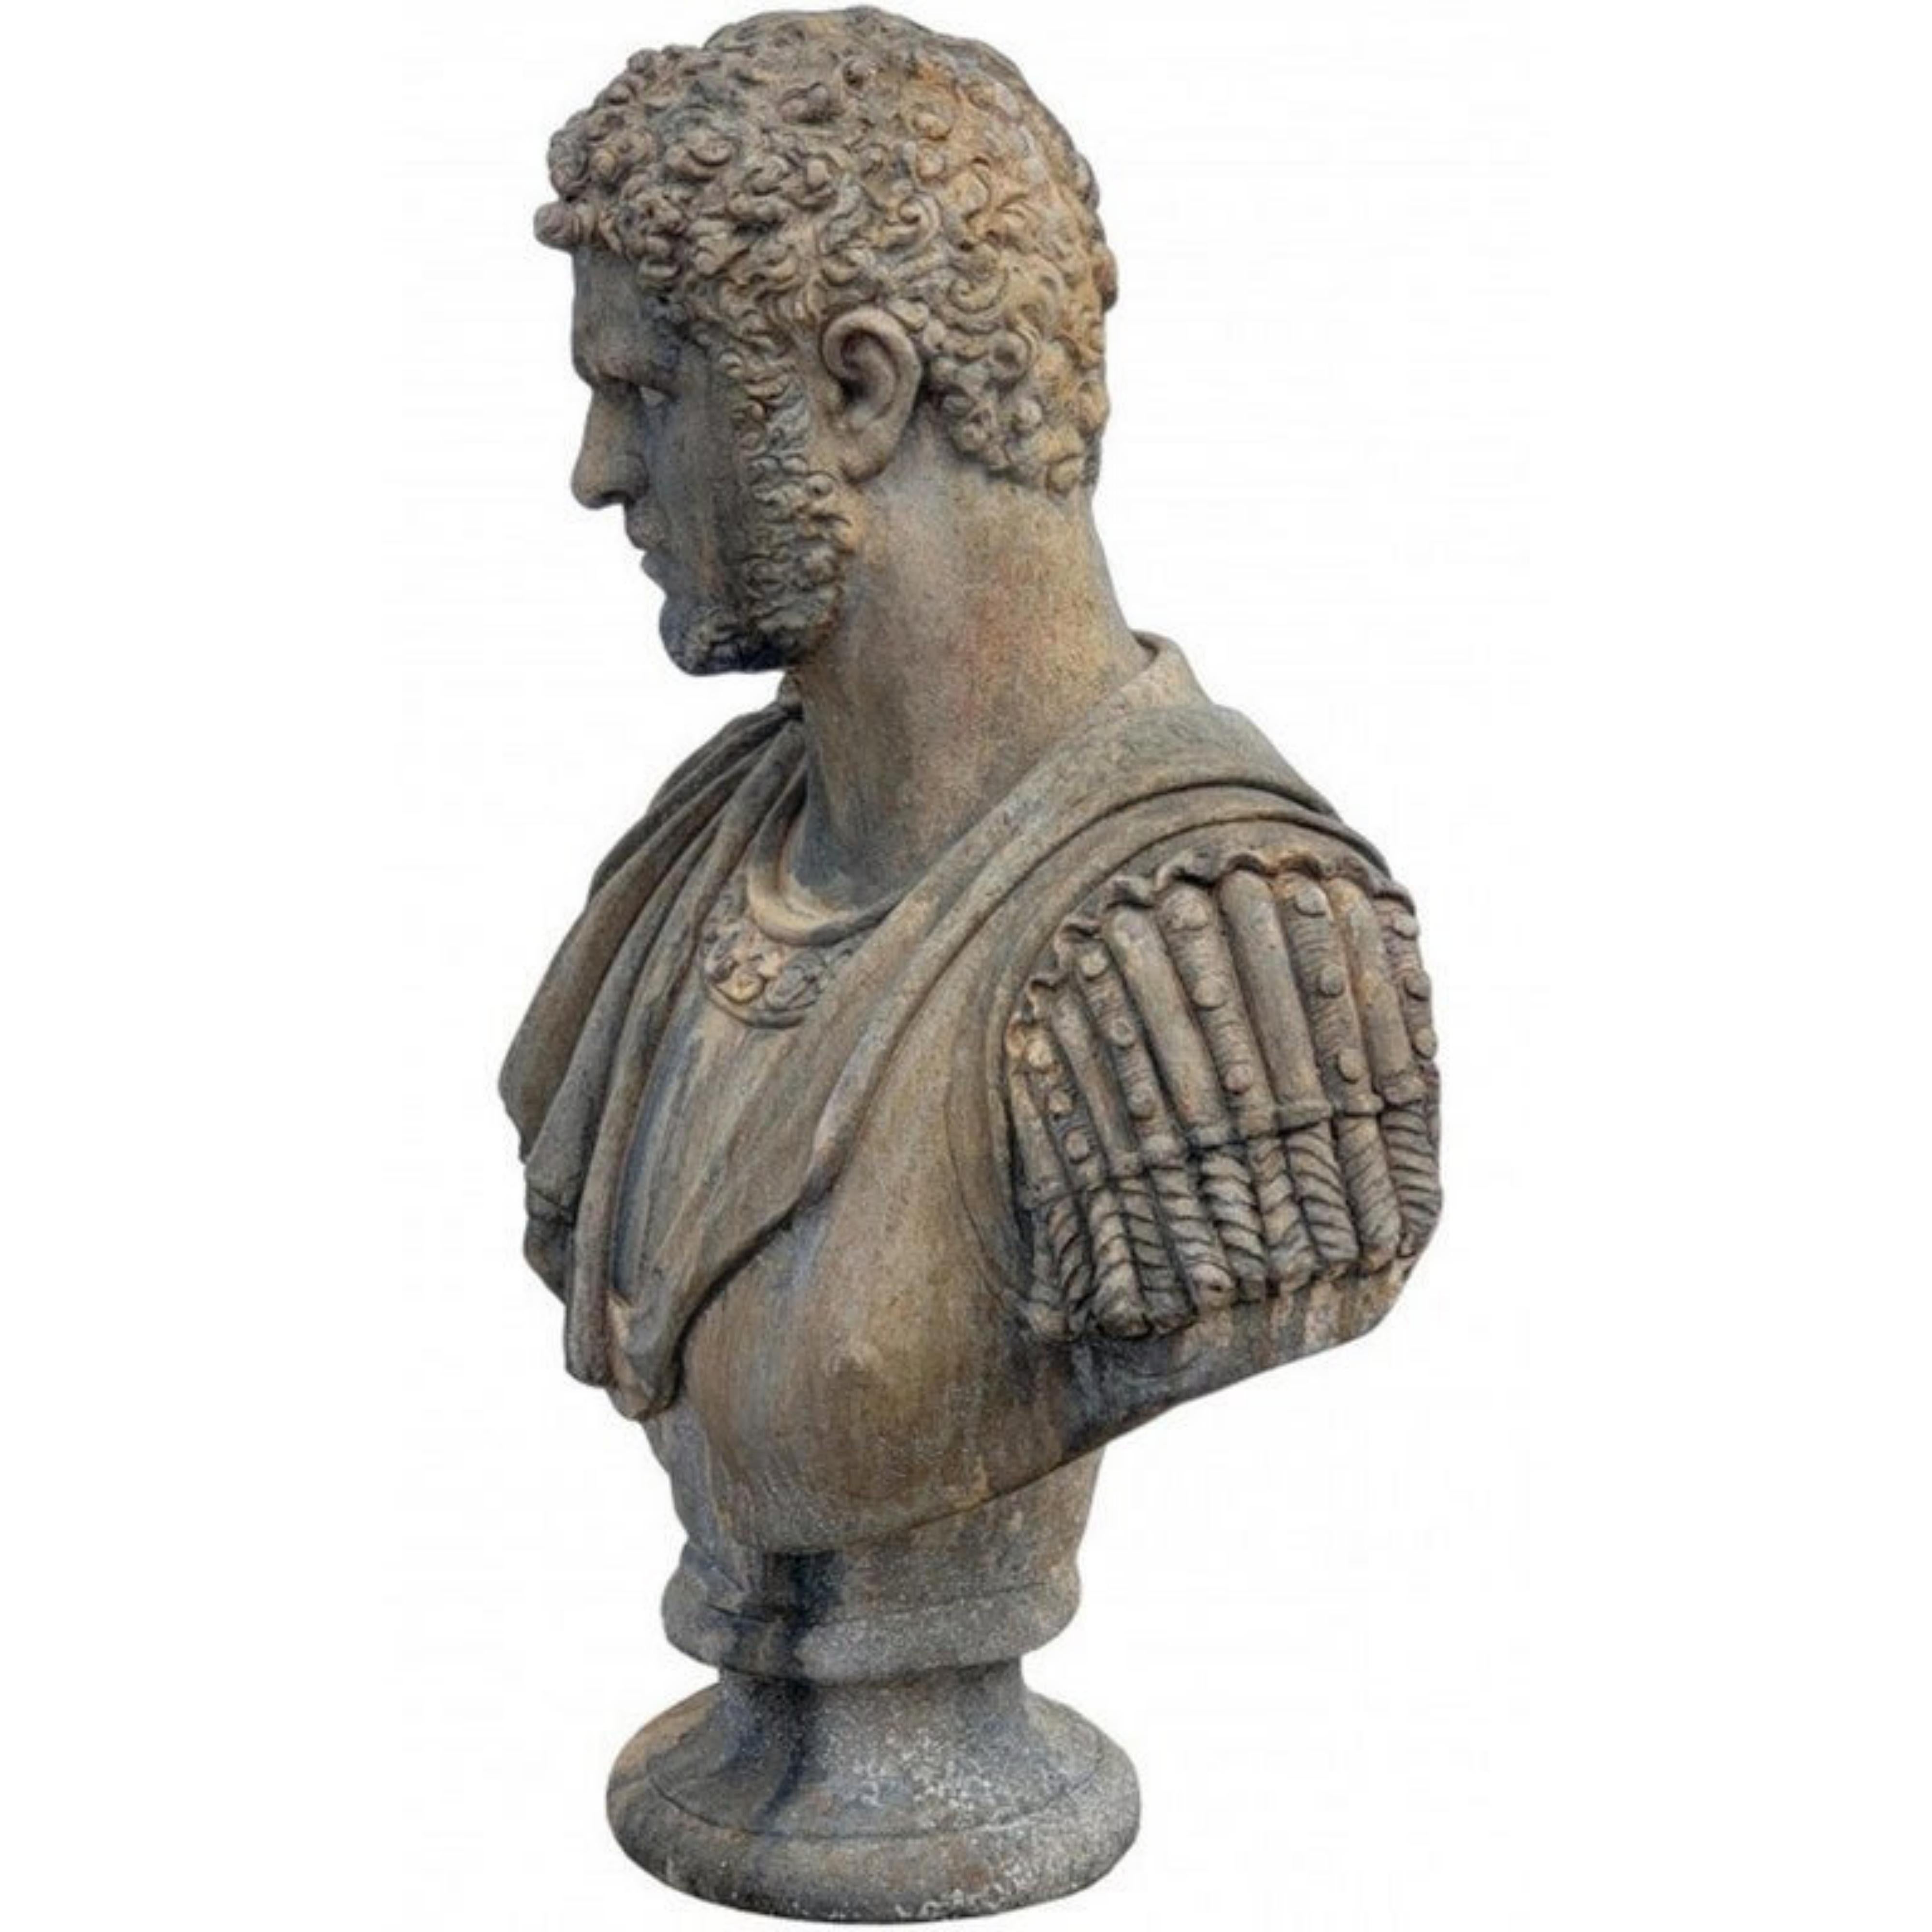 Bust of Caracalla in Terracotta.
Early 20th century.

Measures: height 73 cm.
Width 58 cm
Depth 30 cm
Weight 18 kg
Base diameter 22 cm.
Historical period 216 ad.
Museum where the original is exposed Capitoline Museums (Campidoglio - Rome) Hall of